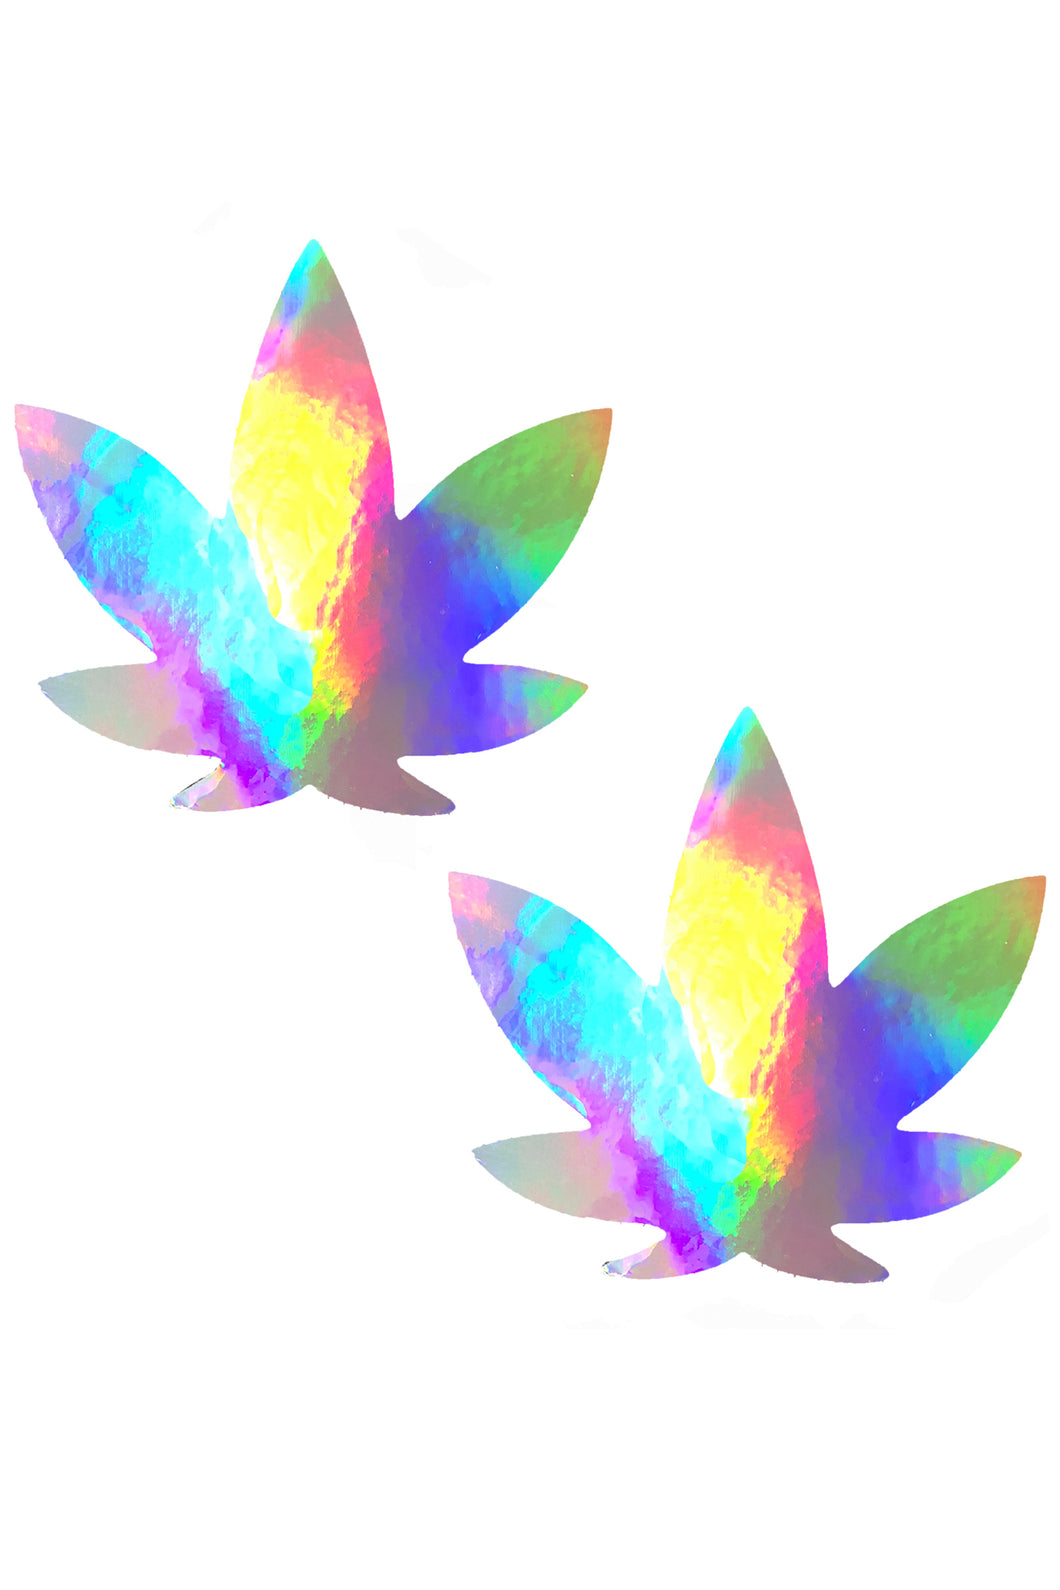 Care Bare Stare Holographic Dope AF Weed Leaf Pasties